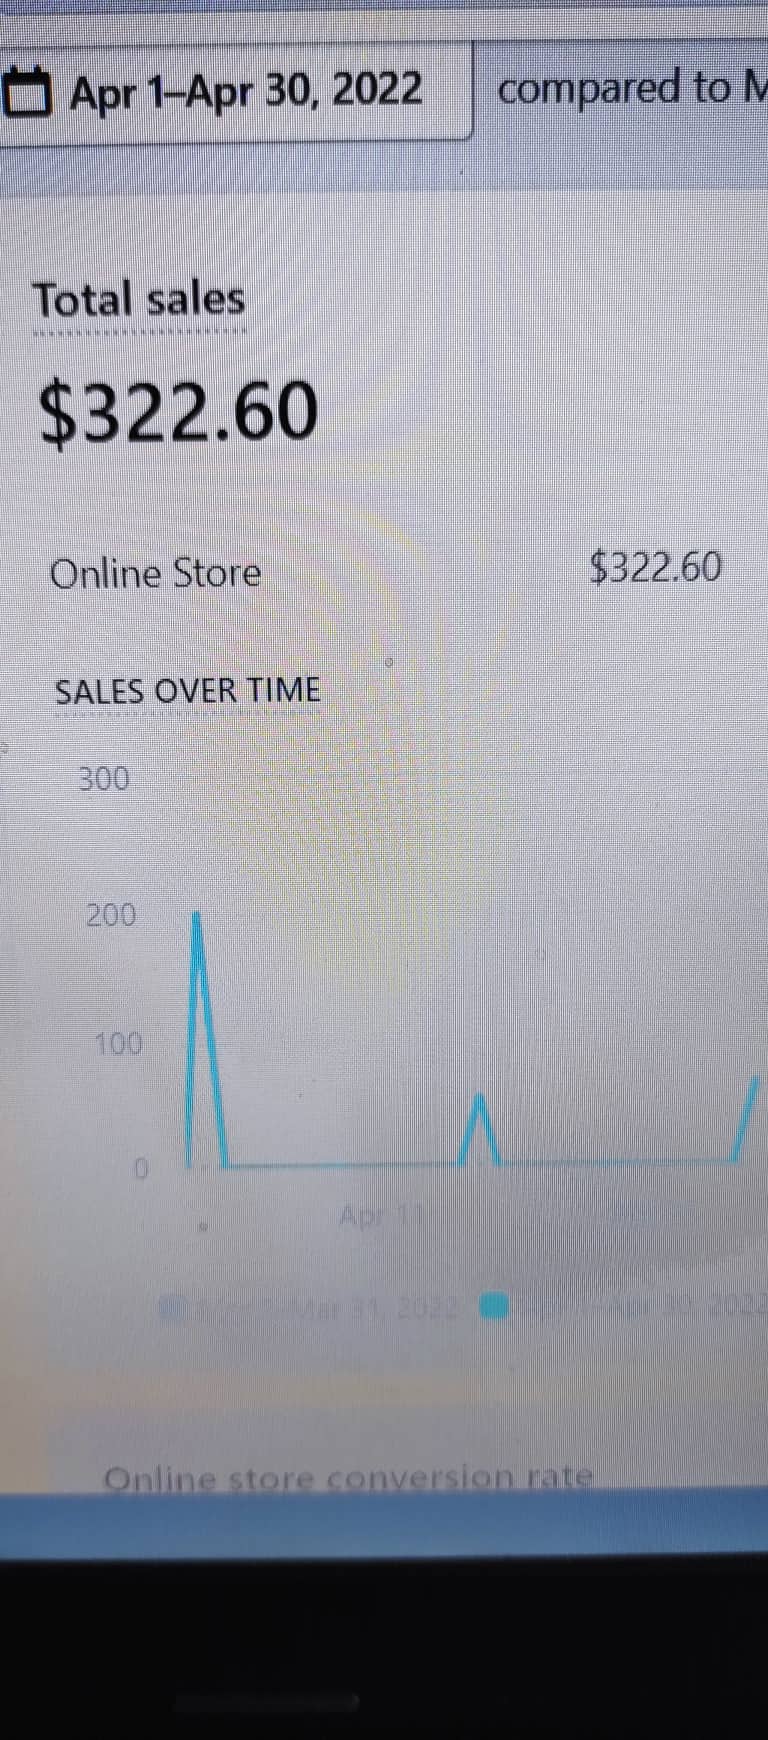 Total sales in dollars for April 2022 on ExiArts website